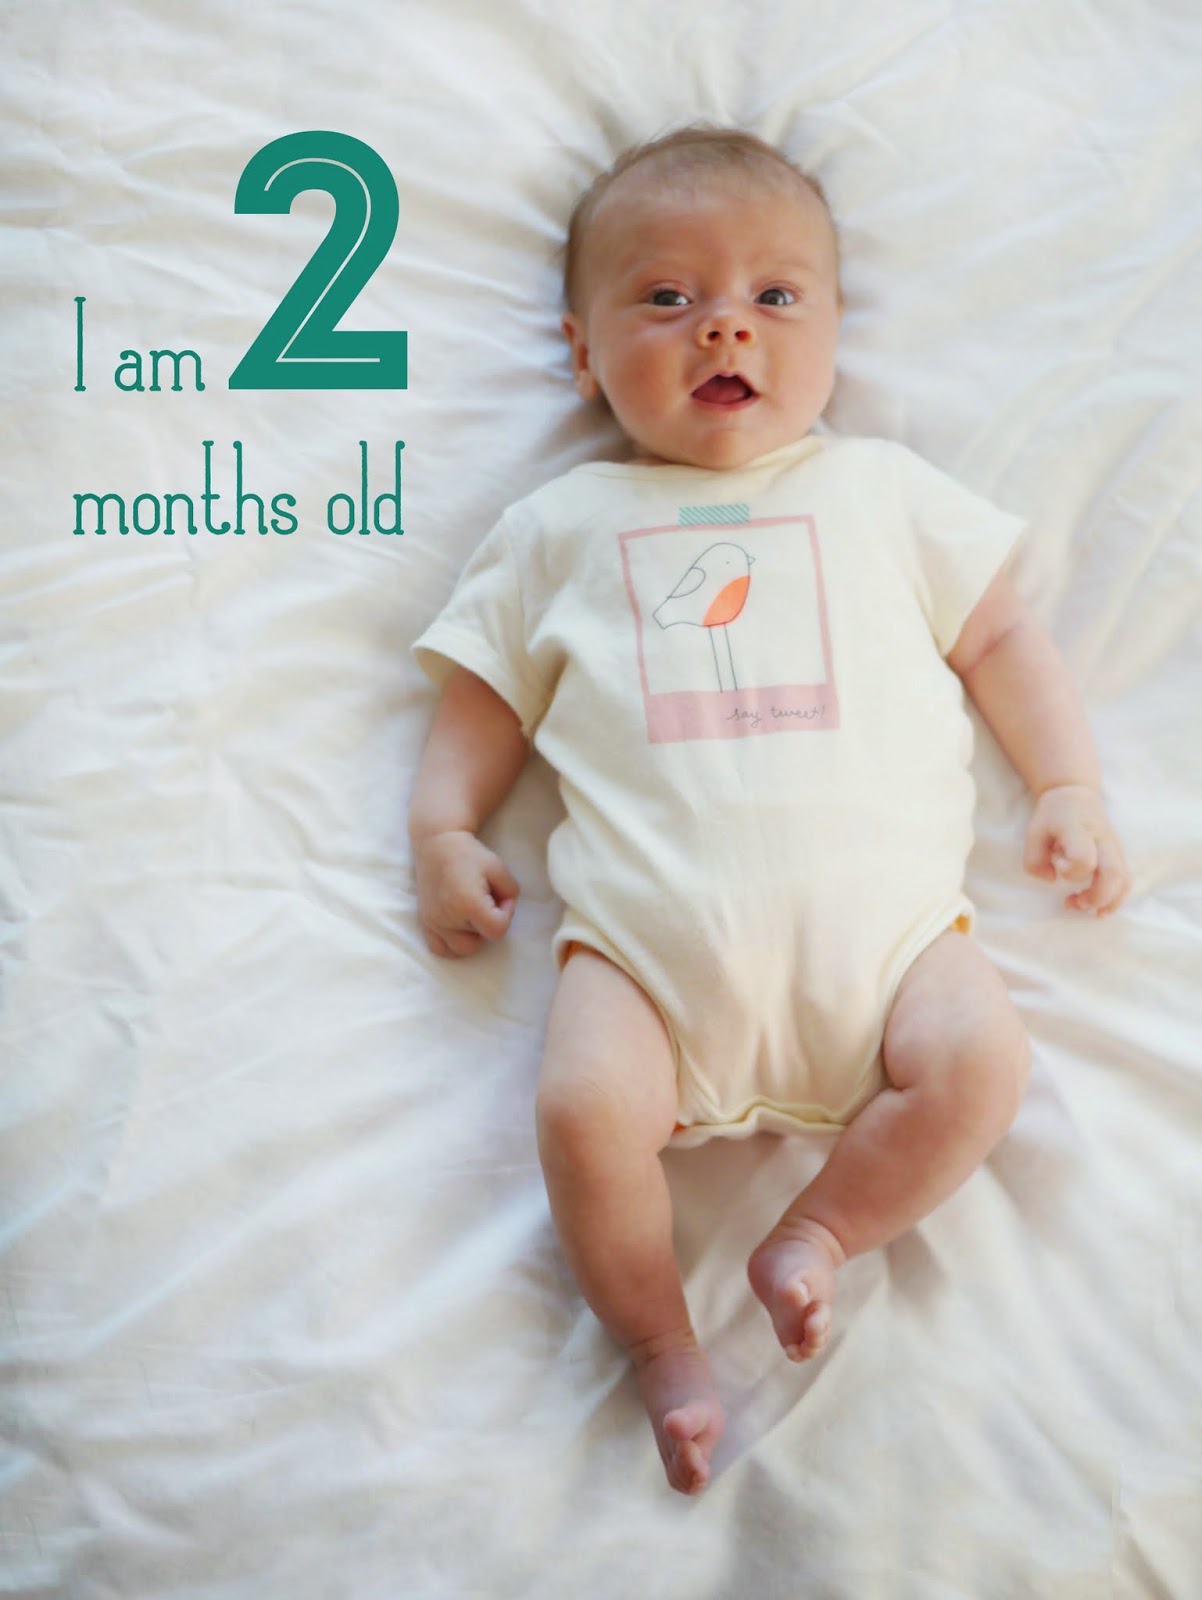 2 months leave. 2 Months Baby. 2 Months old Baby. Two months Baby. 2 Months Baby фото.